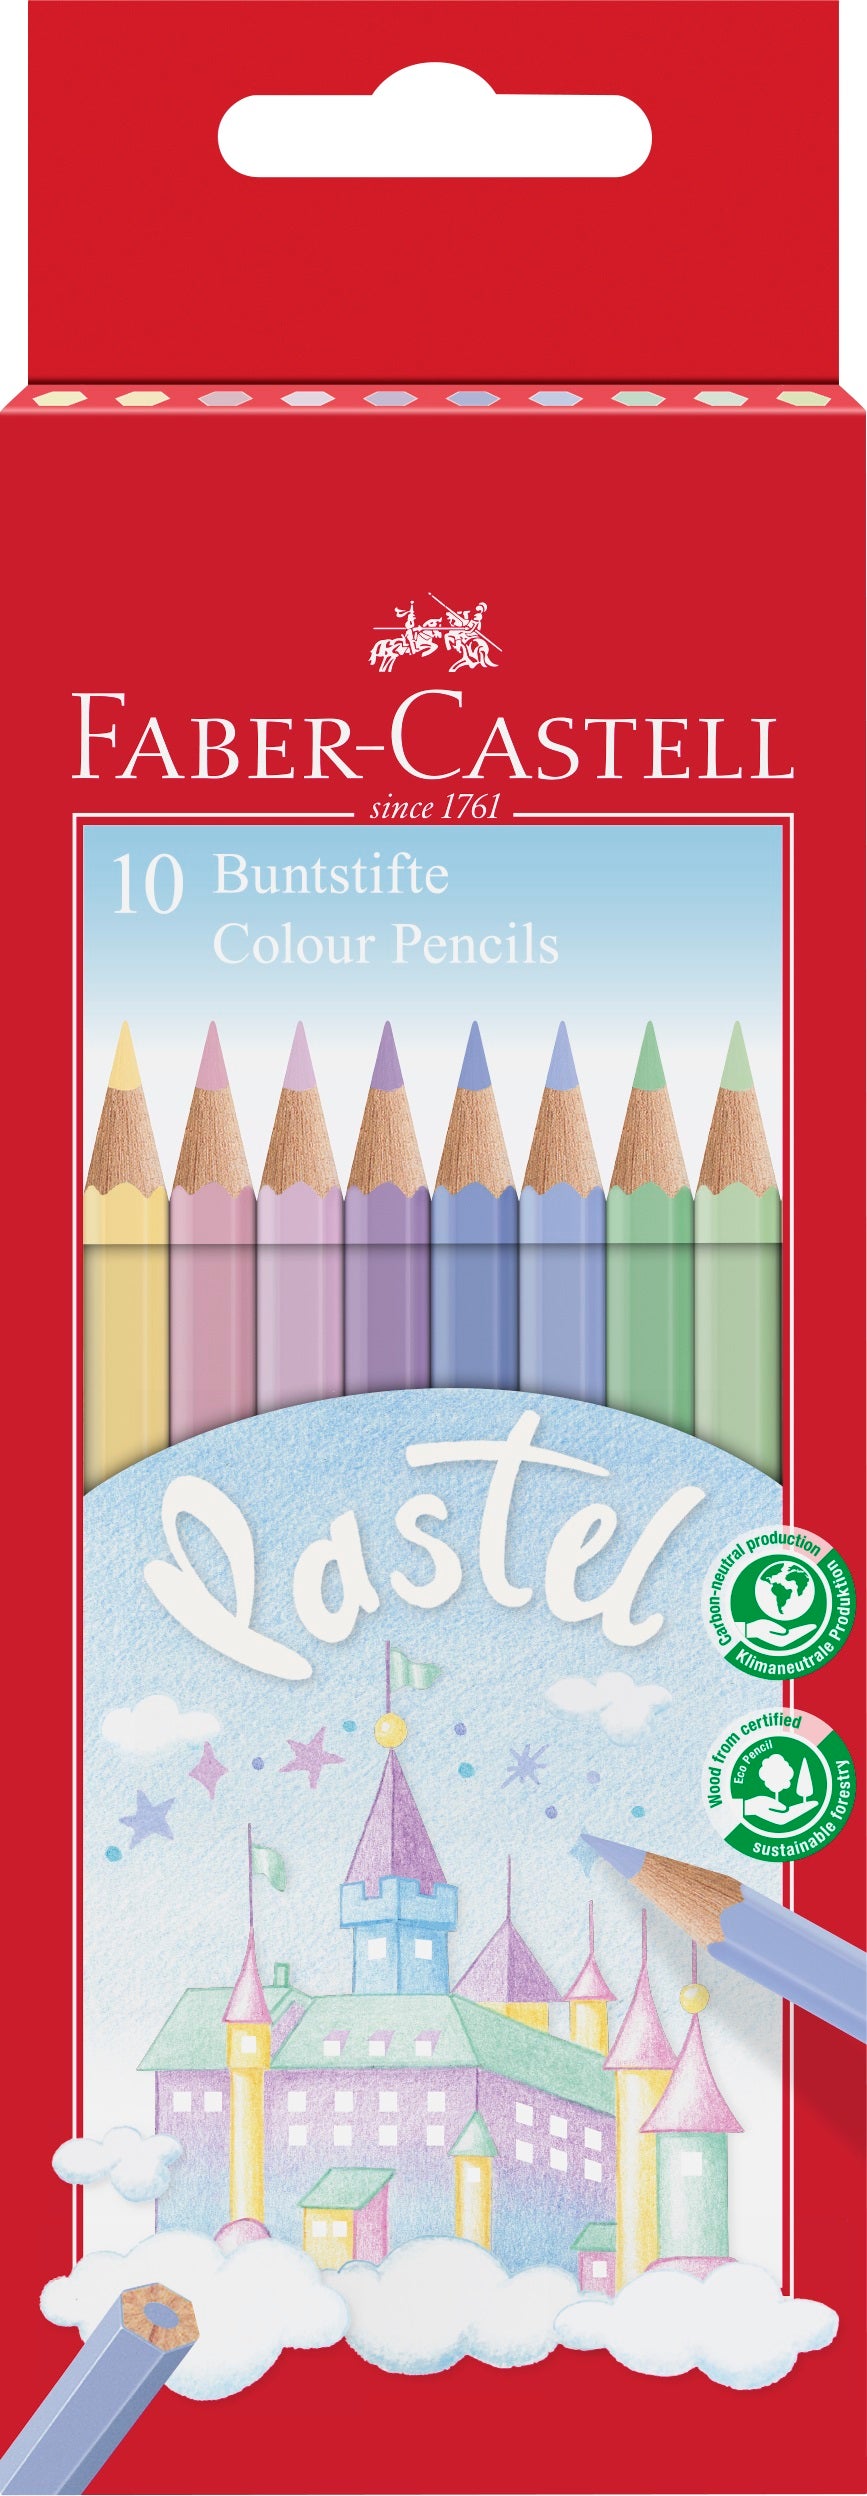 Retail packaging for a pack of 12 pastel metallic colour pencils by Faber Castell. The packaging has a red border, a cut out in the centre showing the pencils inside plus an illustration of them in use. 